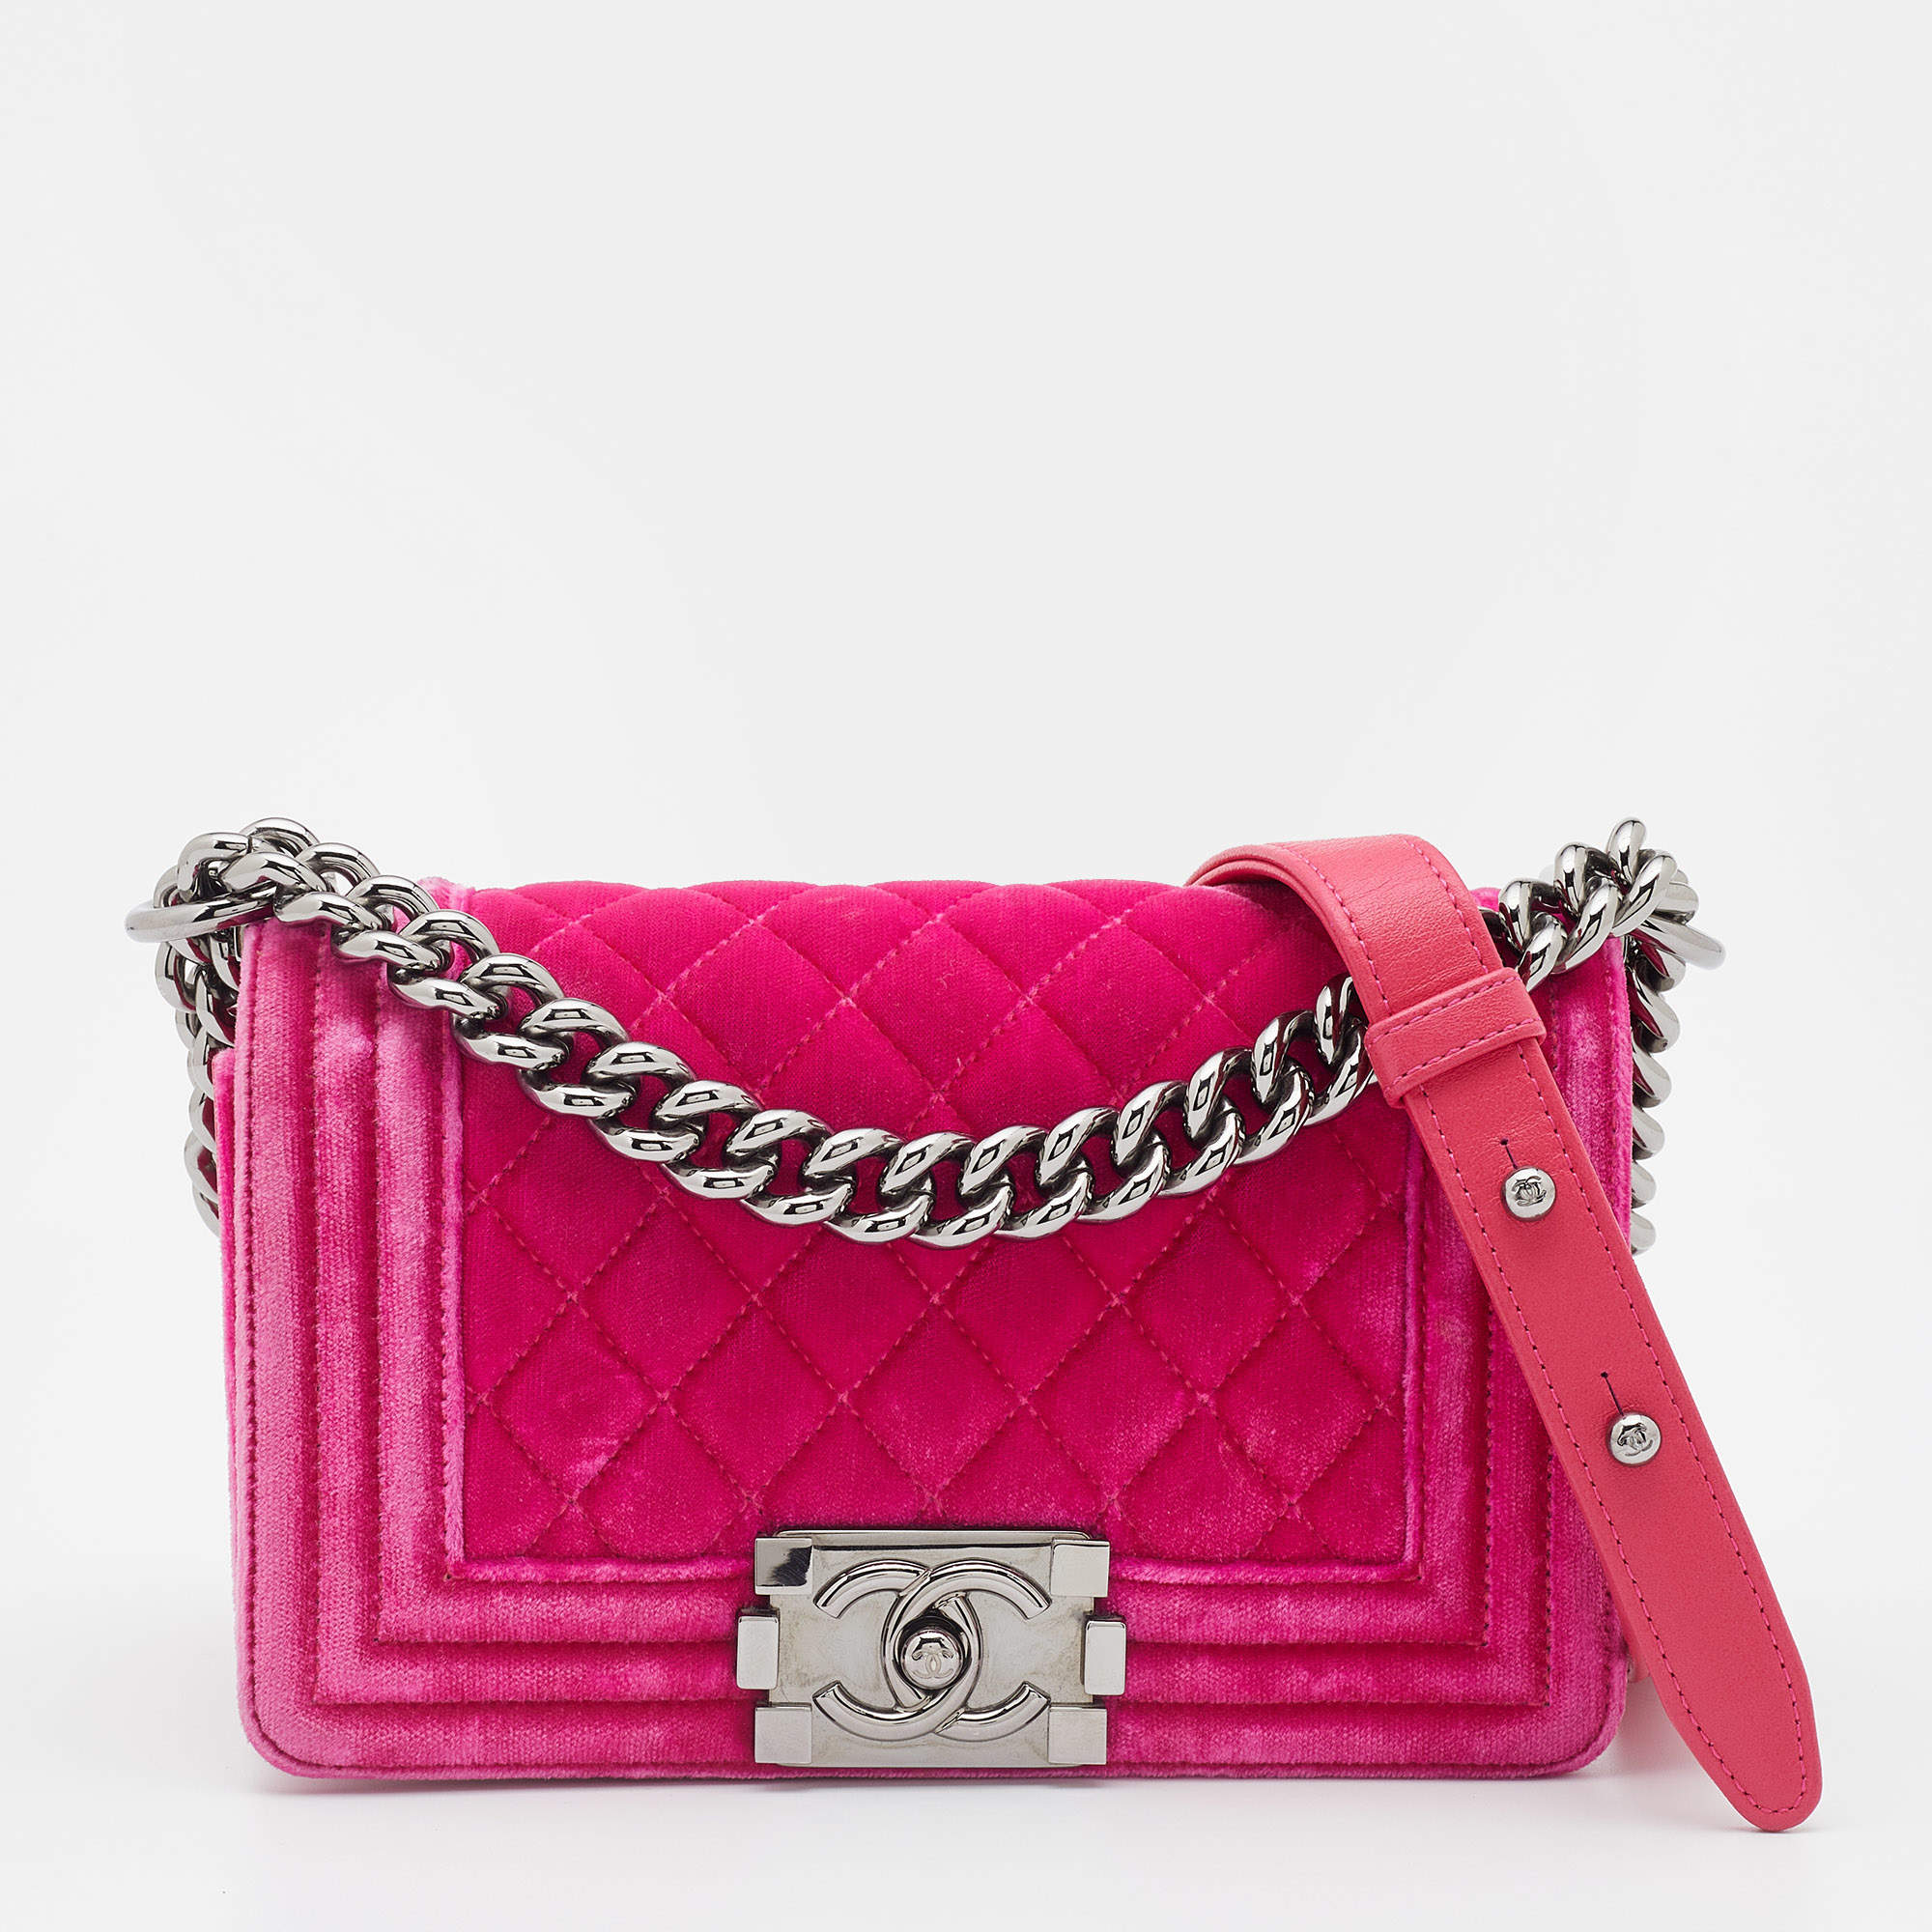 Chanel Pink Quilted Velvet Small Boy Bag